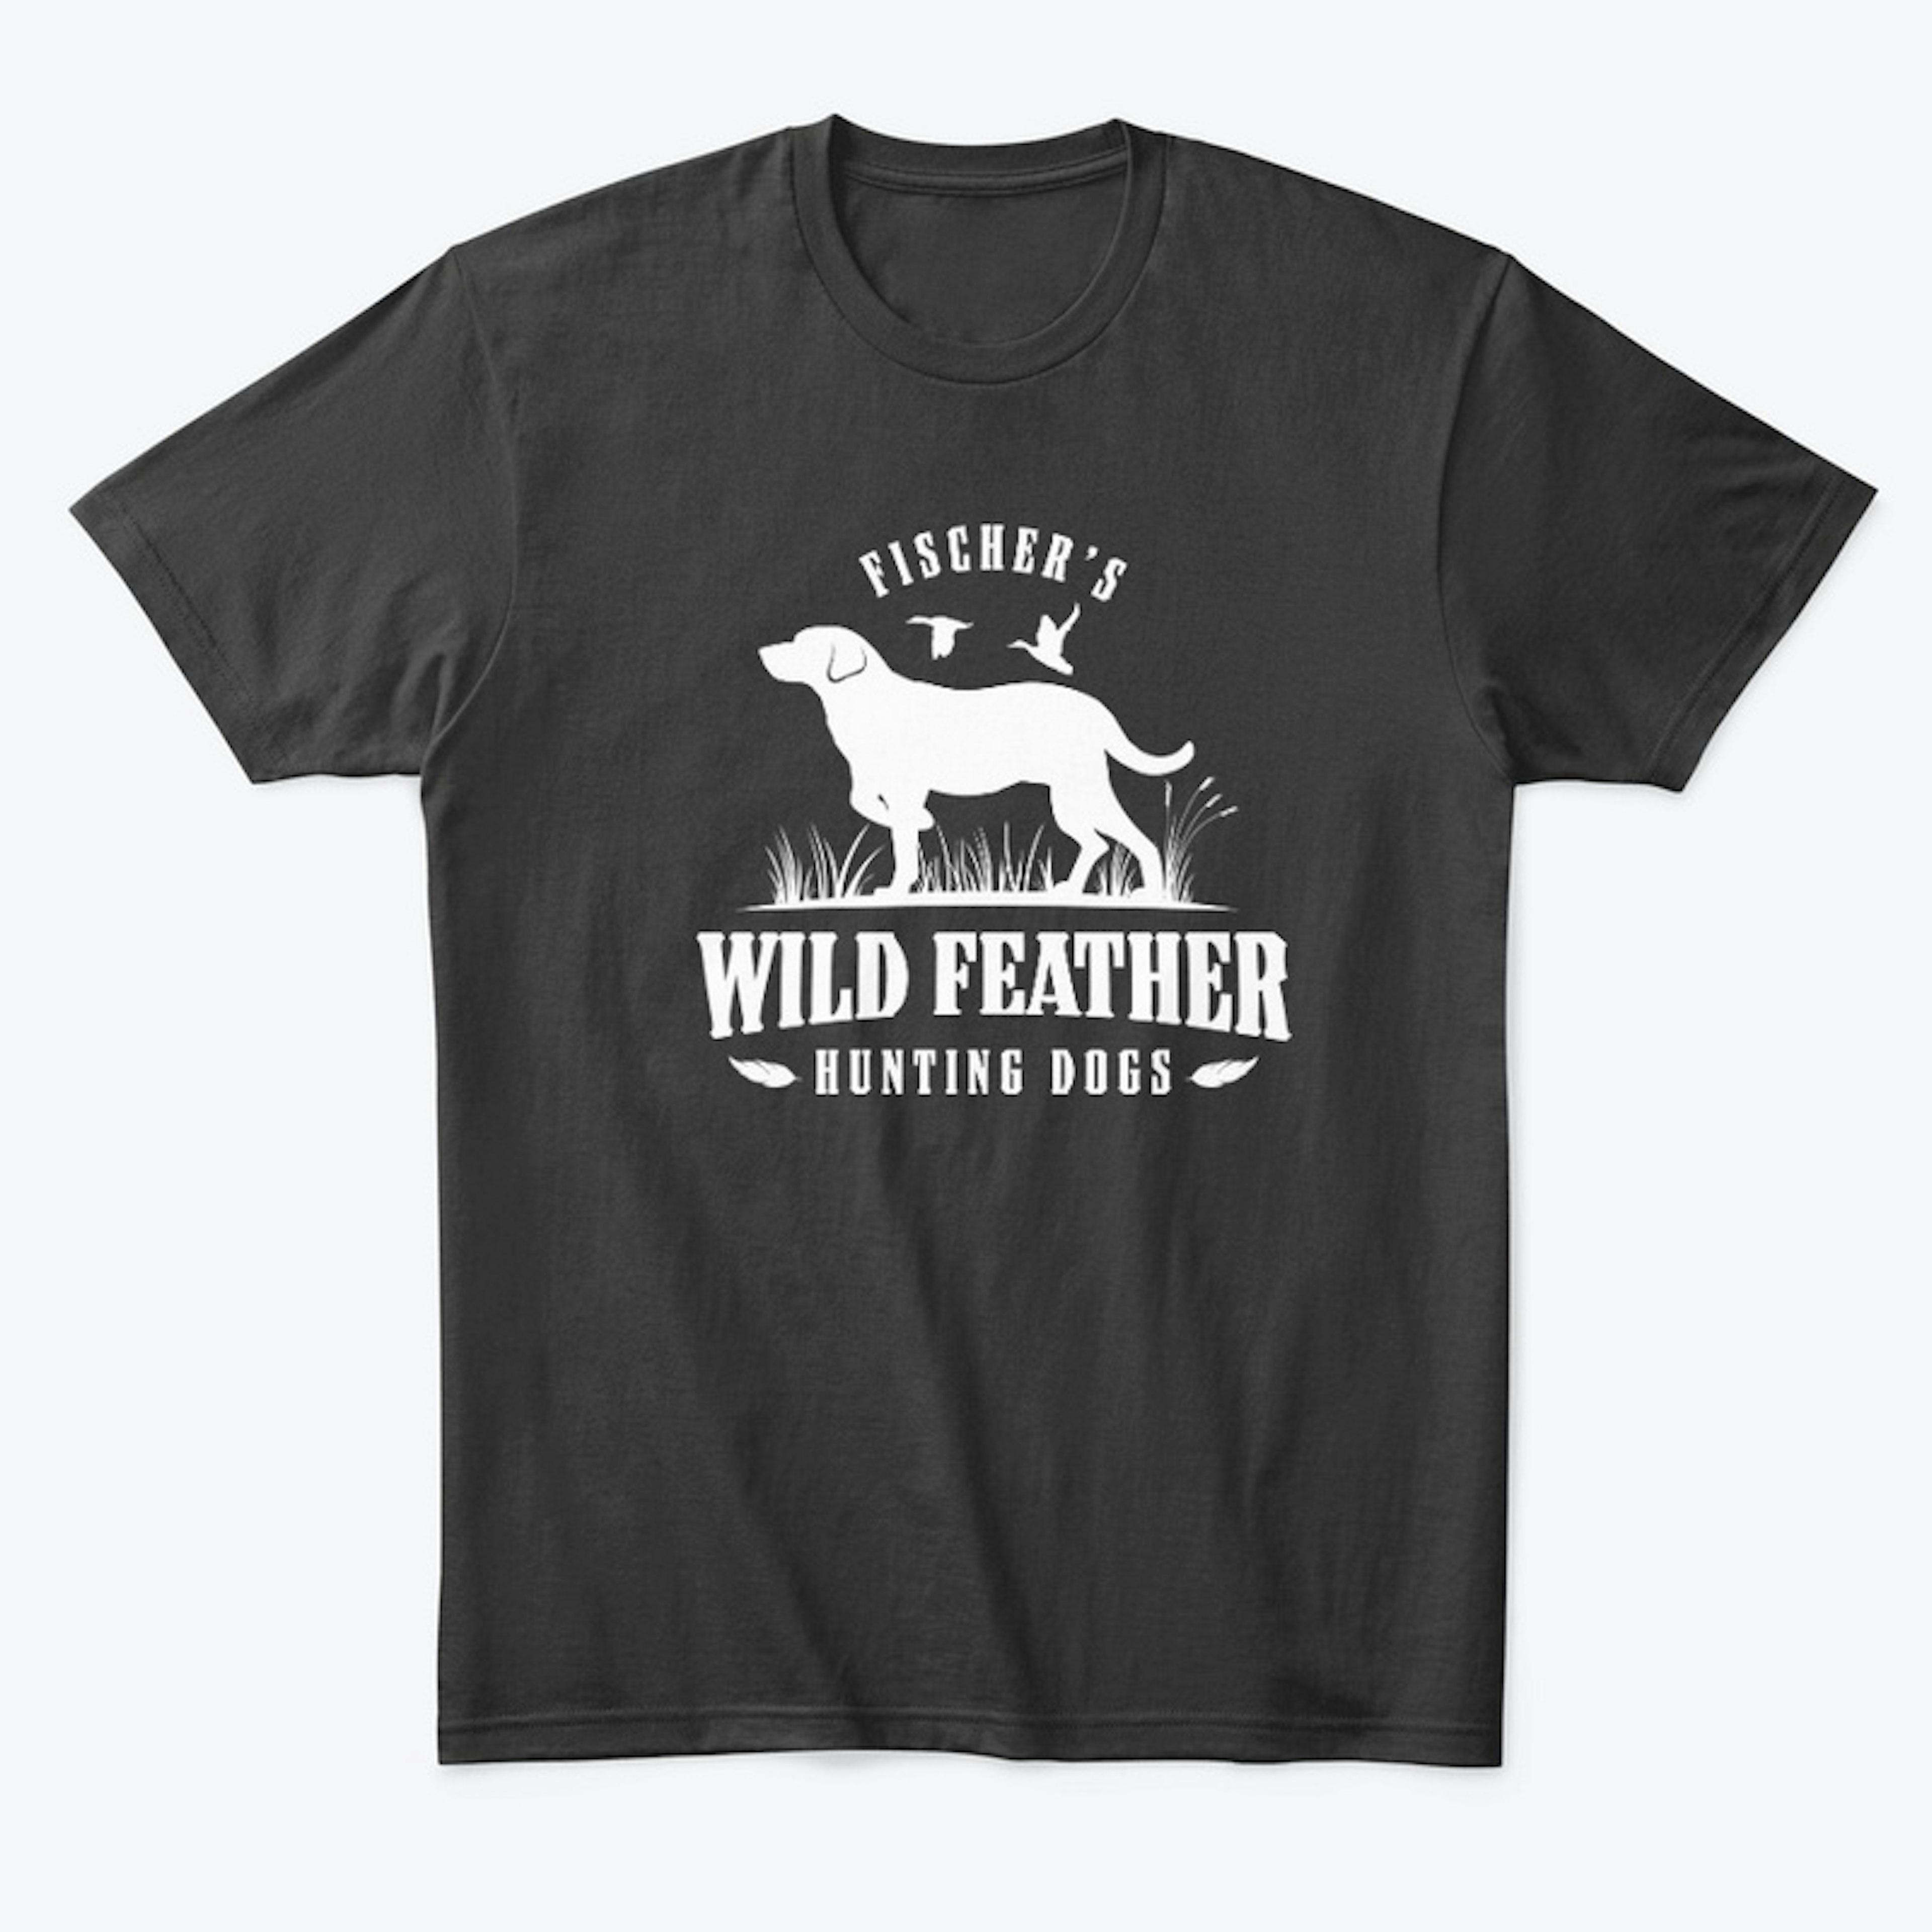 Wild Feather Hunting Dogs gear